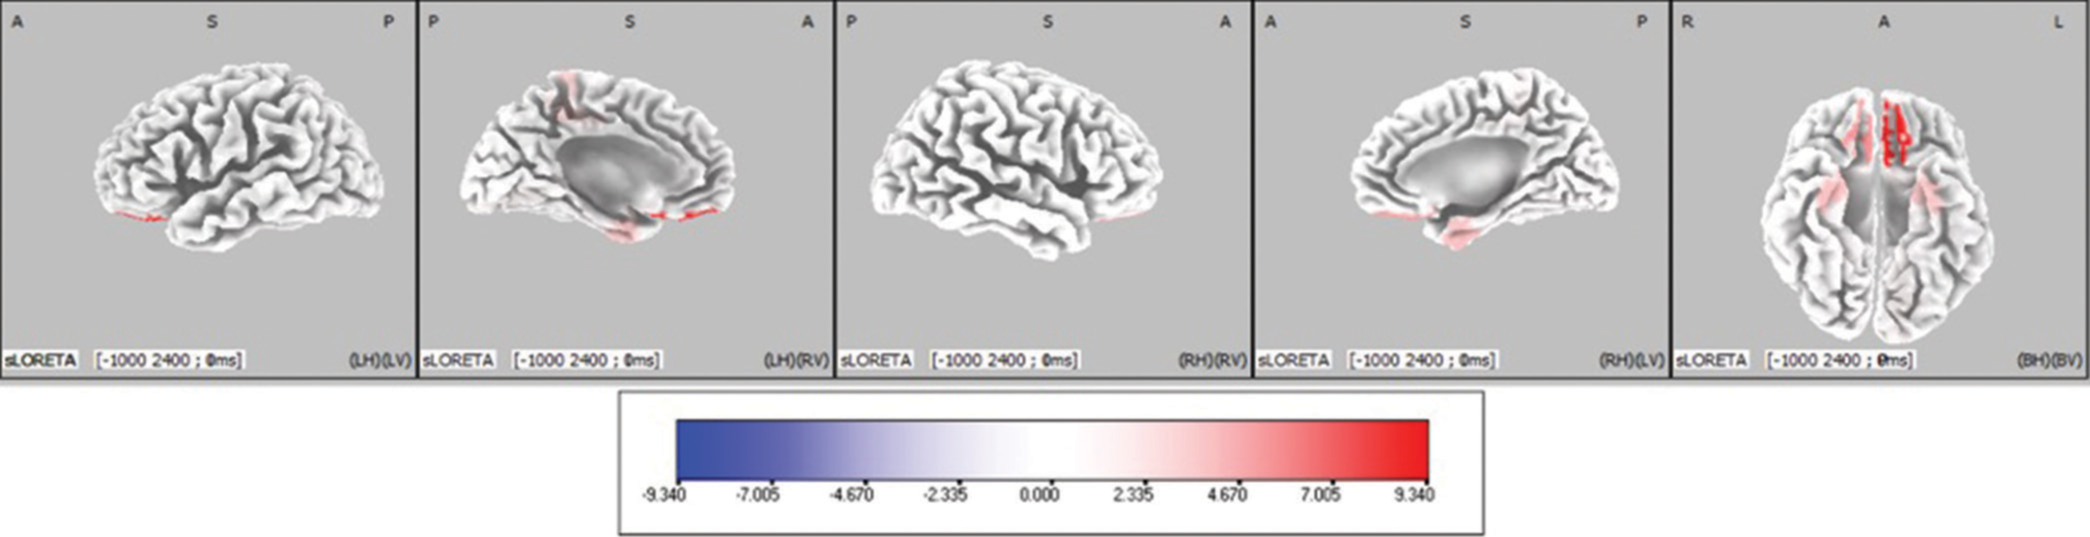 Cortical areas showing significantly different activity between Face-word interference (FwI) and Word-face interference (WfI) have been marked in orthogonal plots. Blue coloured areas indicate decreased activity in Face word interference task as compared to Word face interference. The scale provided measures the t-statistics based on SnPM analysis comparing the current source density in (nA/mm2) between FwI and WfI.